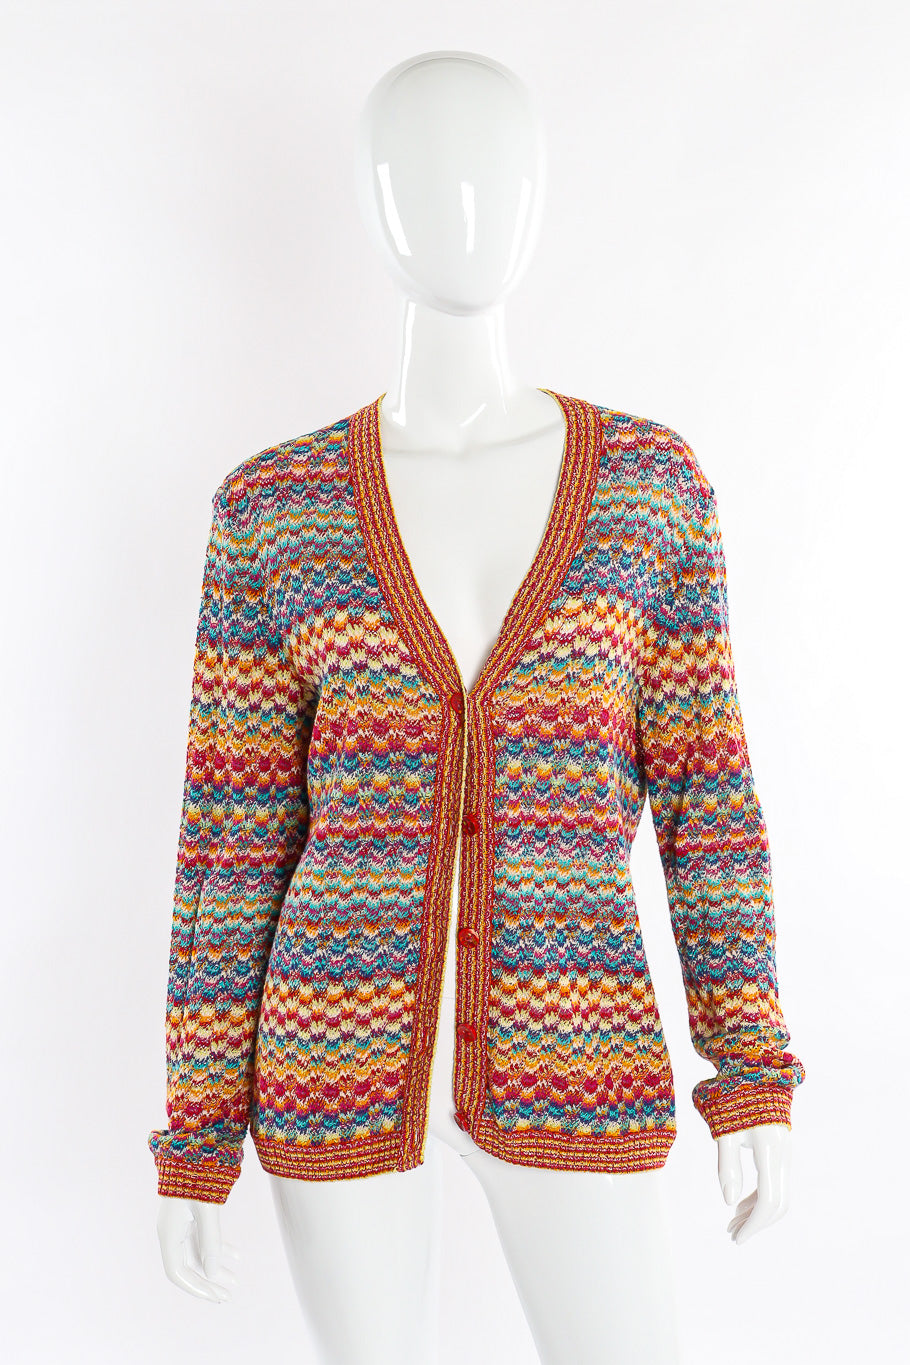 Scallop stripe classic knit 2 piece set by Missoni mannequin cardigan only front @recessla